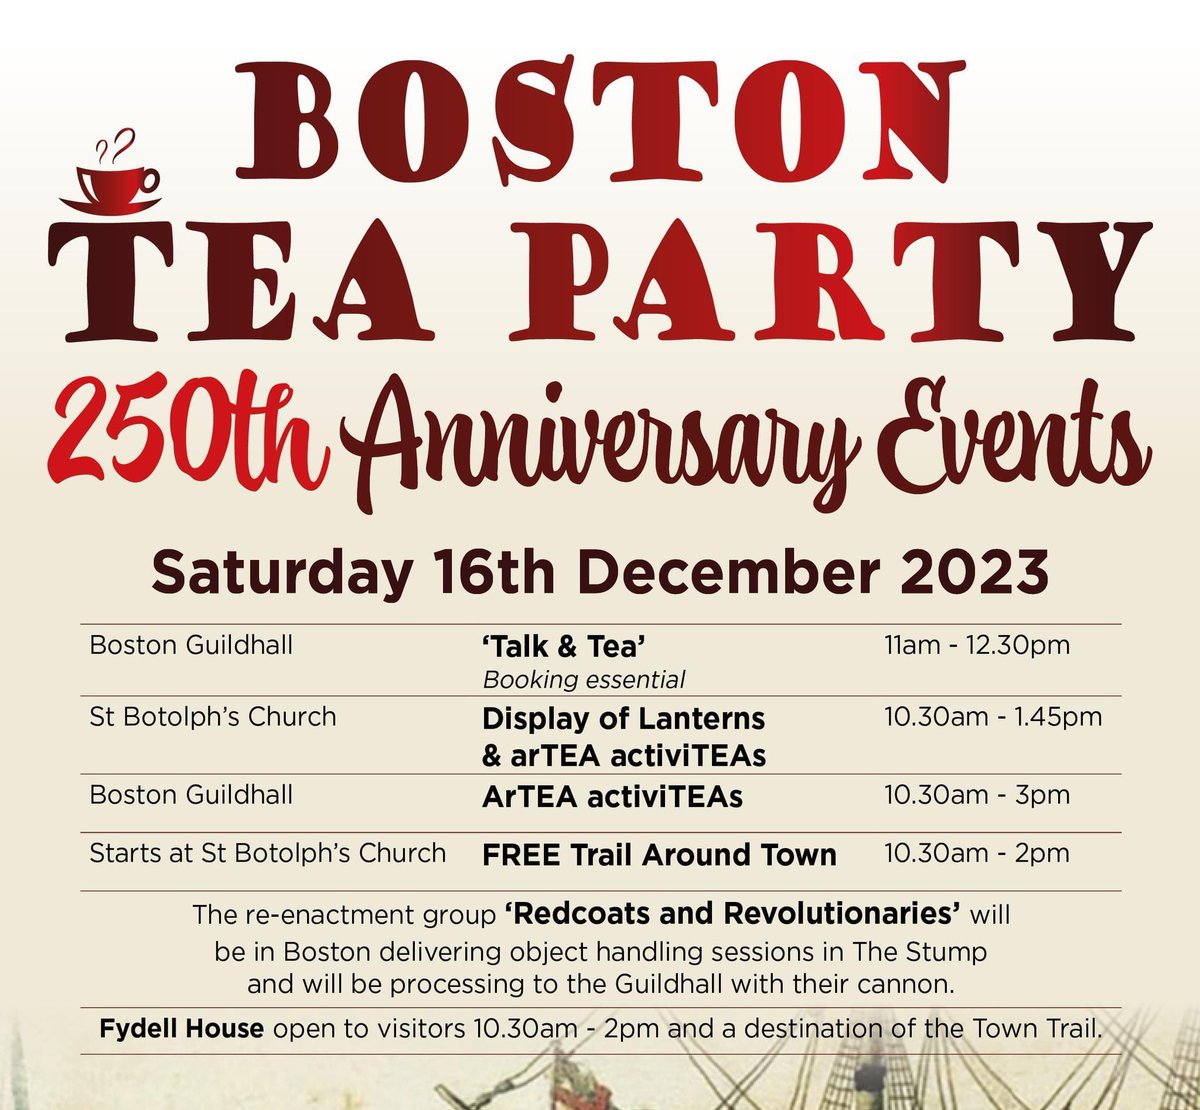 🌟 TODAY! December 16 is not just a day—it's a historical celebration in Boston. Lantern displays, arTEA activiTEAs, and Redcoats Re-enactors await you. Let's make this a day to remember! 🎉 

#BostonTeaParty250 #CelebrateHistory #TransportedArt